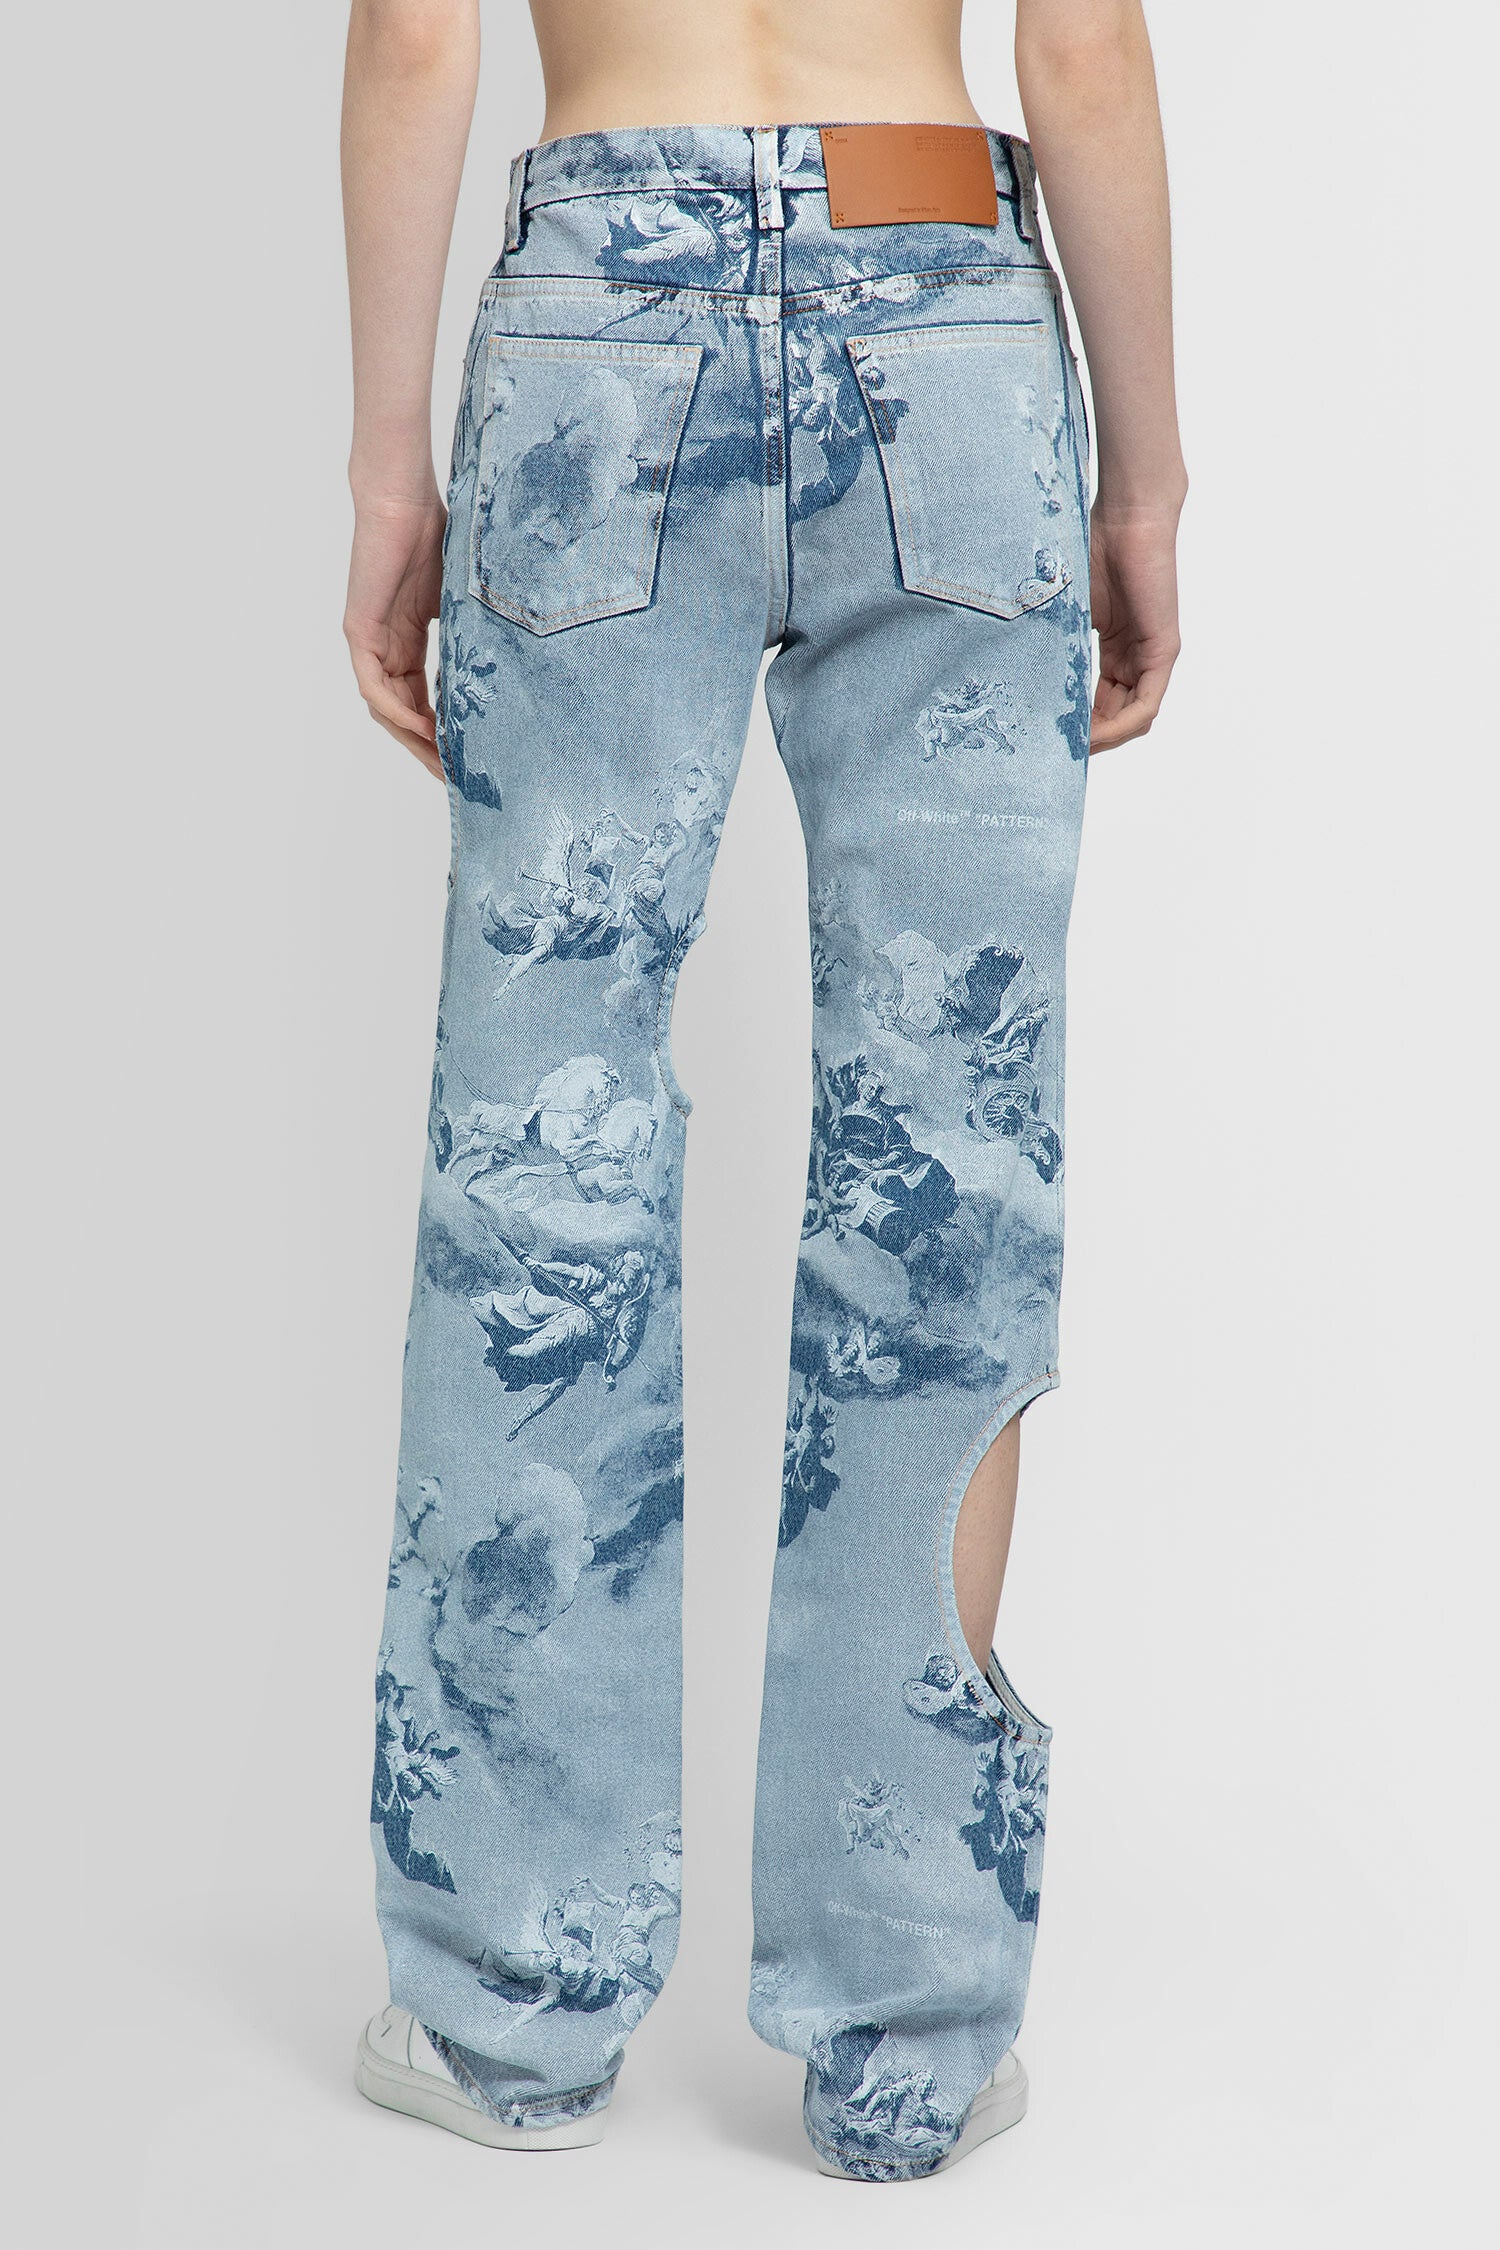 Off-White c/o Virgil Abloh Sky Meteor Cool Baggy Jeans in Blue